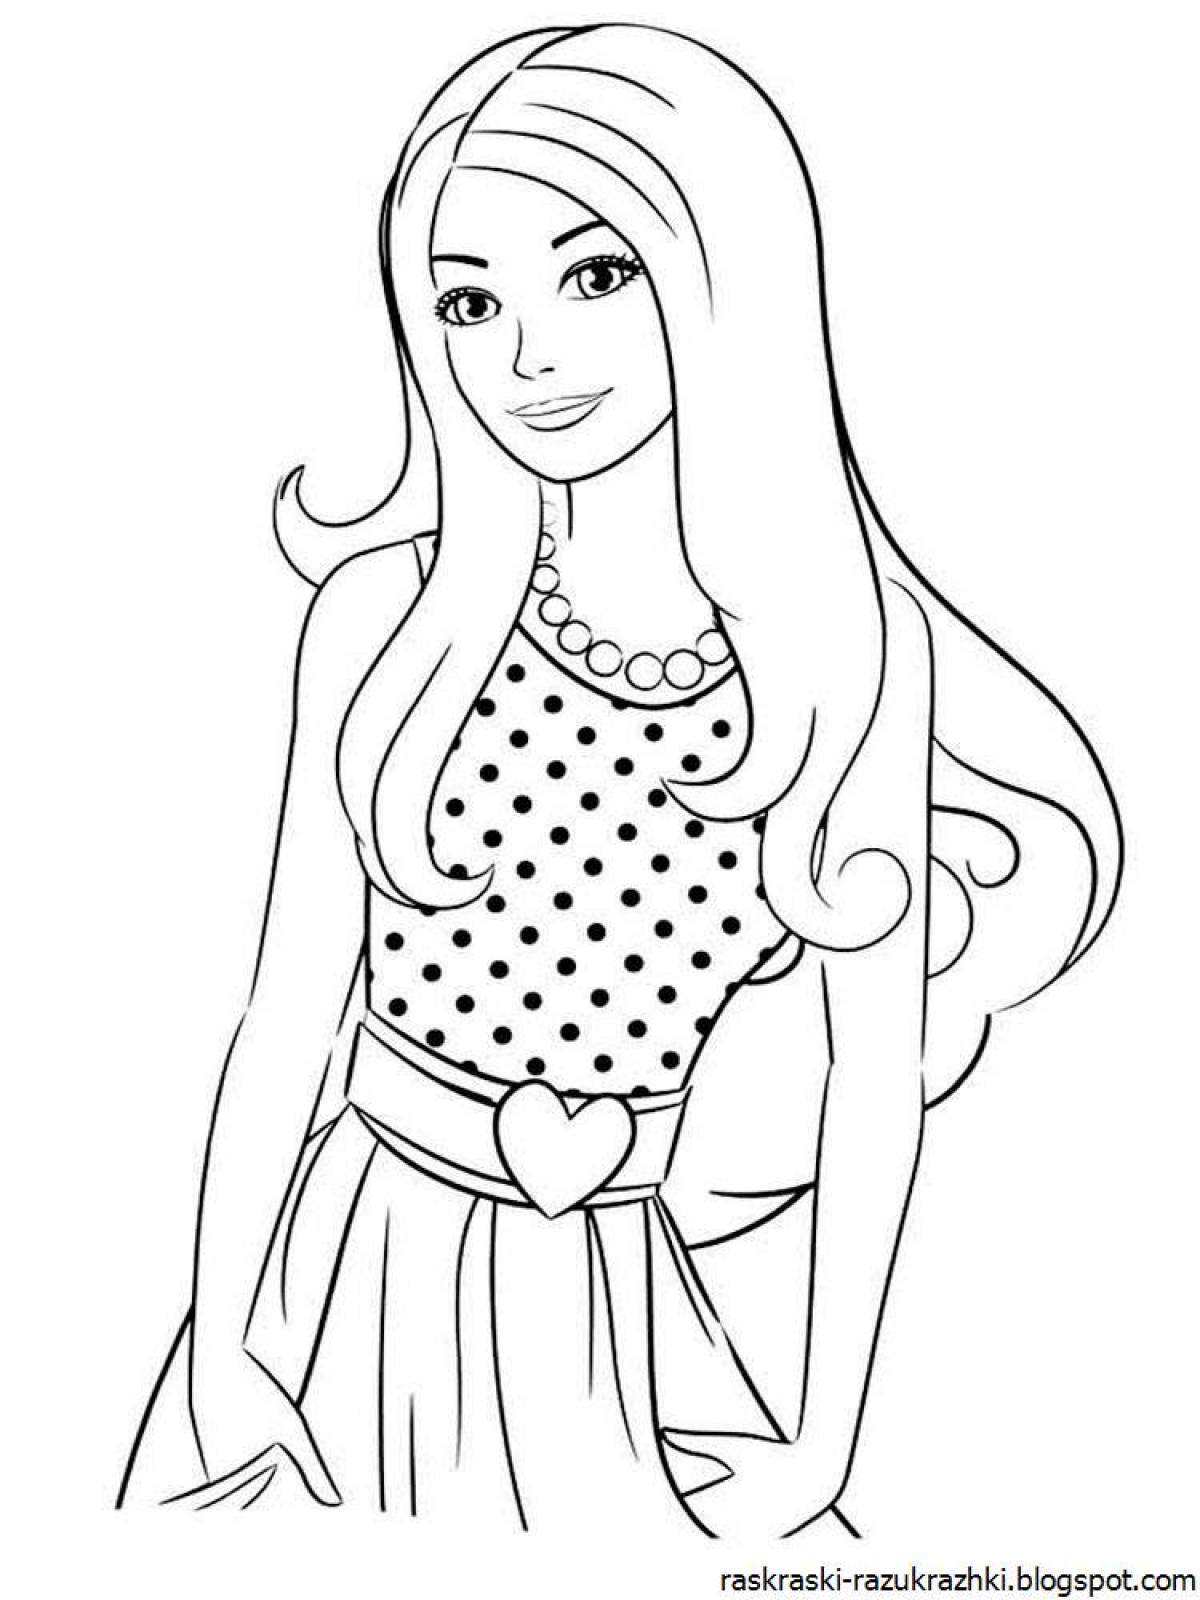 Shiny barbie coloring book for kids